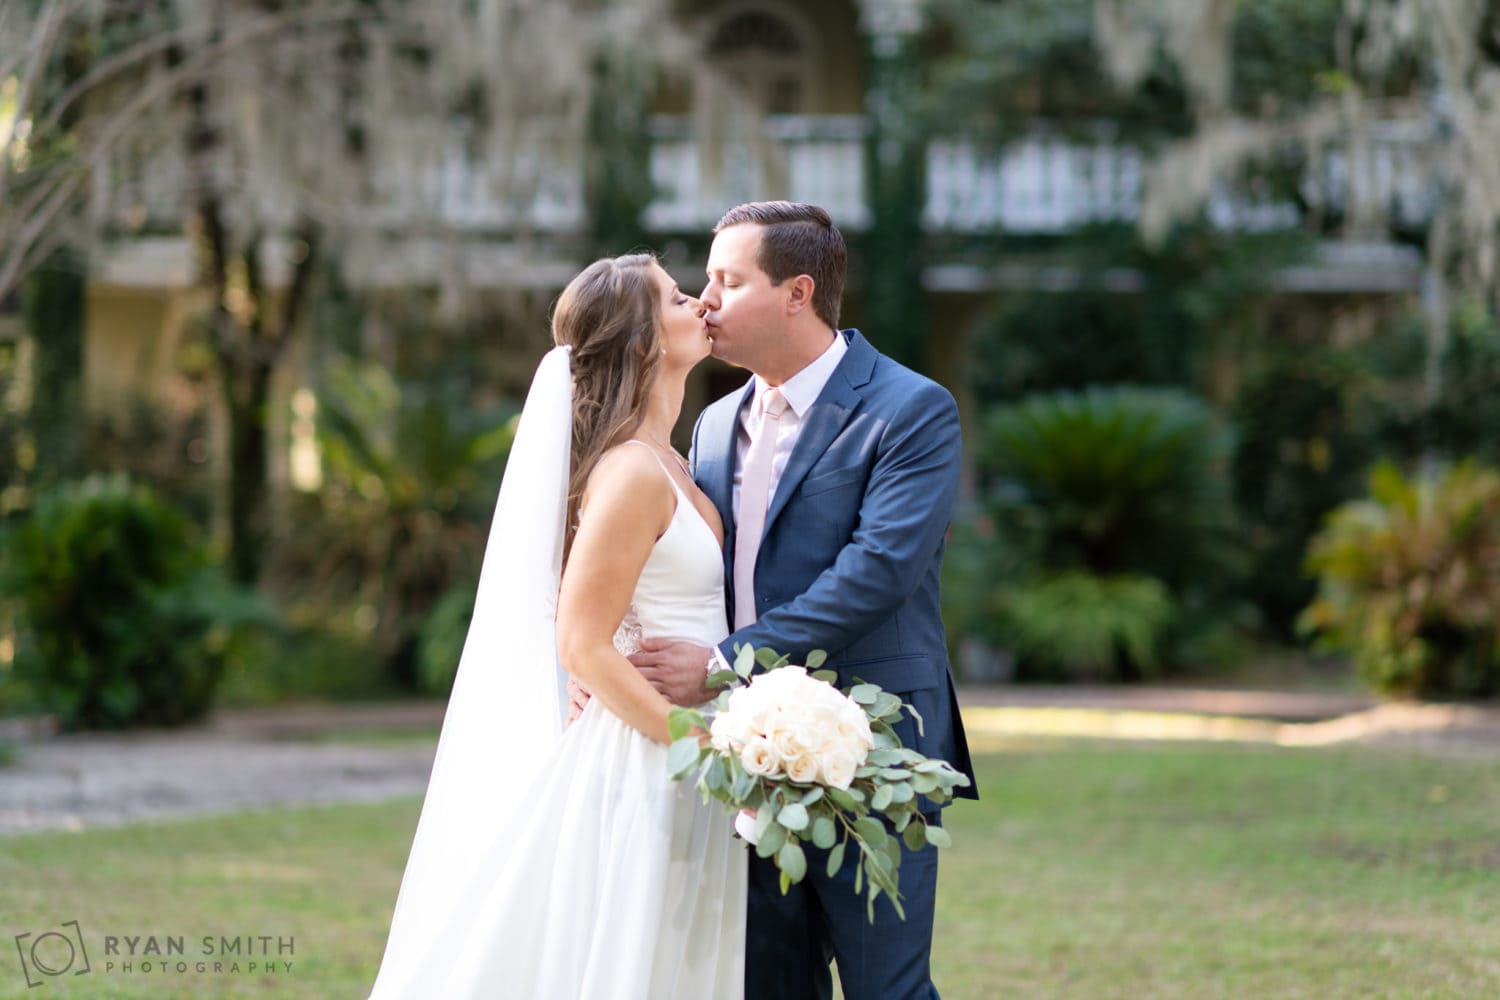 Bride and groom in front of the ivy covered house - Oak Allee - Wachesaw Plantation